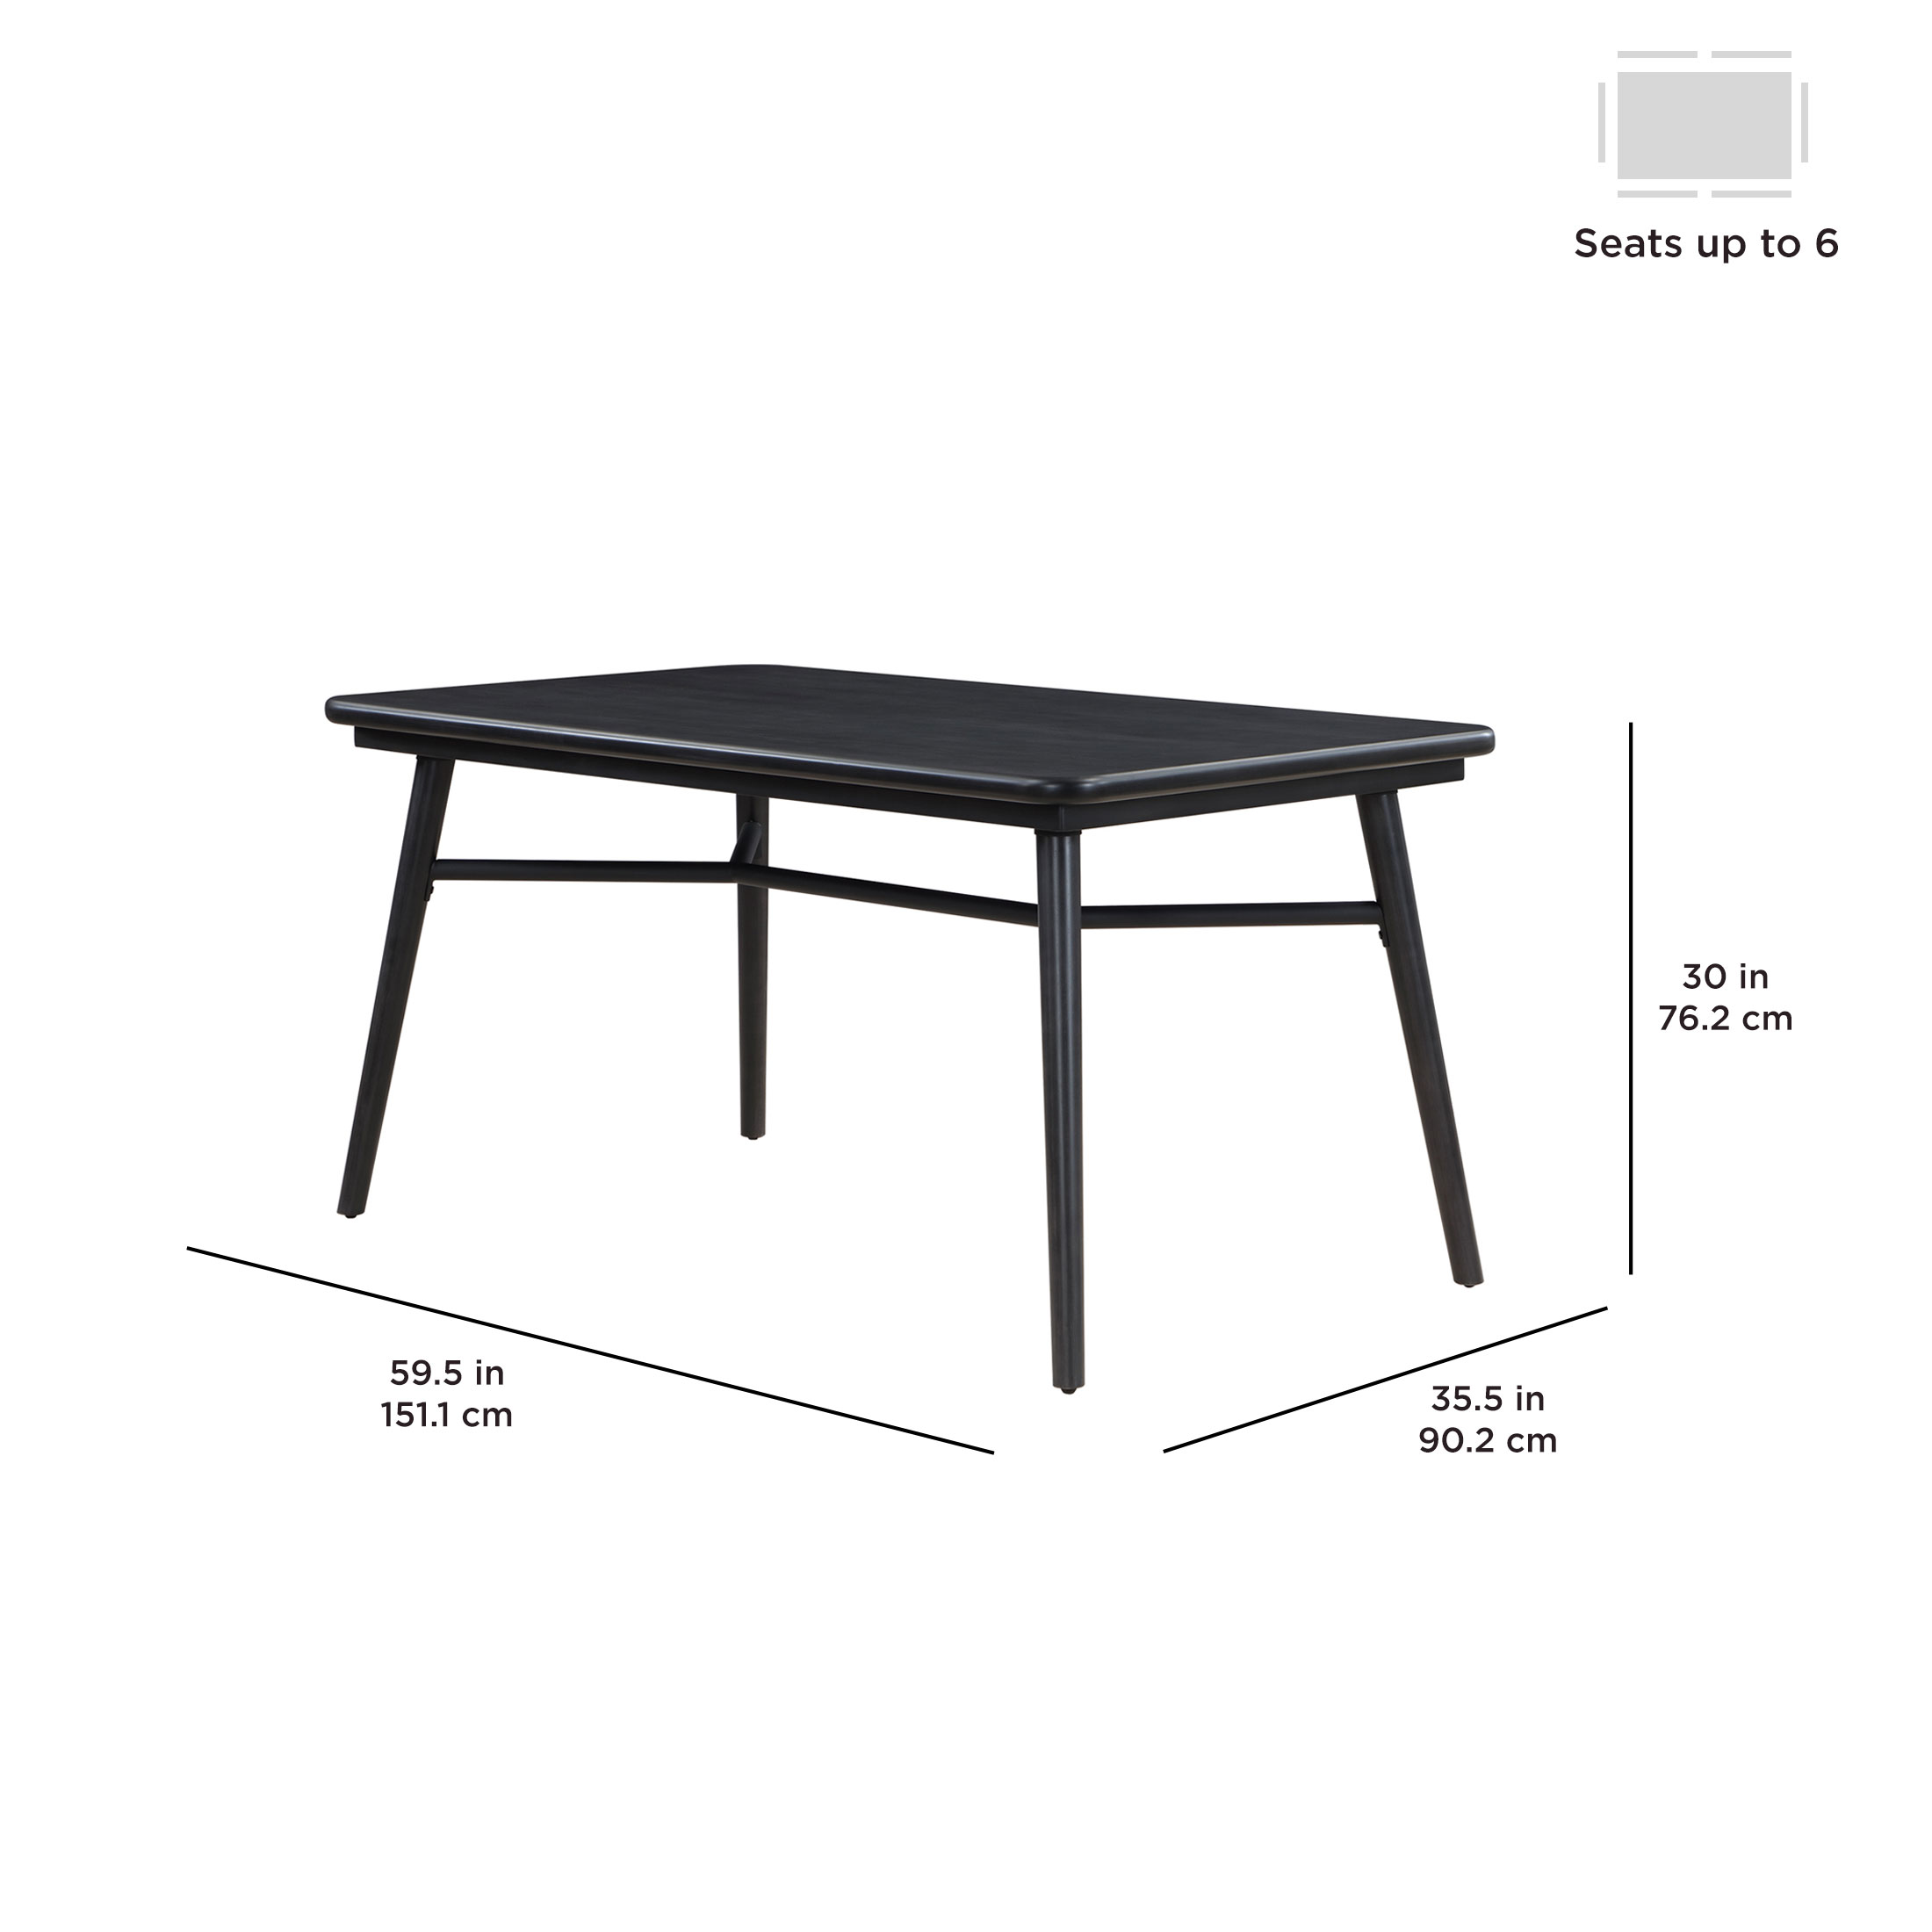 Better Homes & Gardens Springwood Dining Table, Charcoal - image 5 of 15